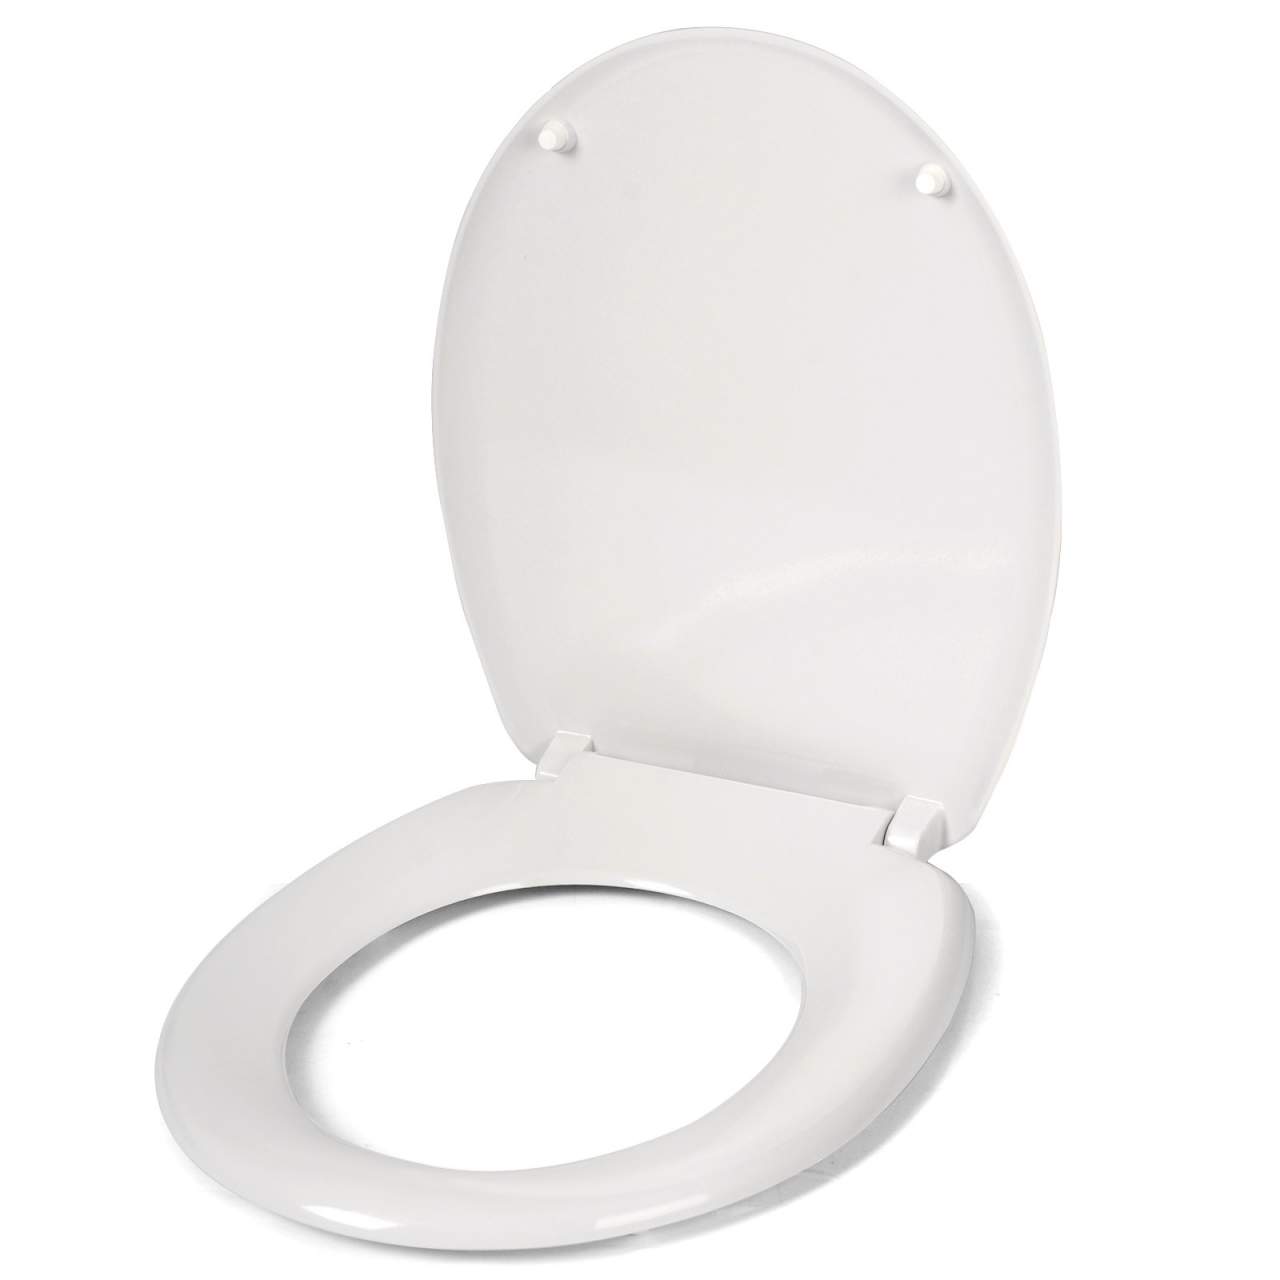 Bathroom Toilet Seat Soft Close Quick Release Top Fixing Hinges Heavy Duty UK 